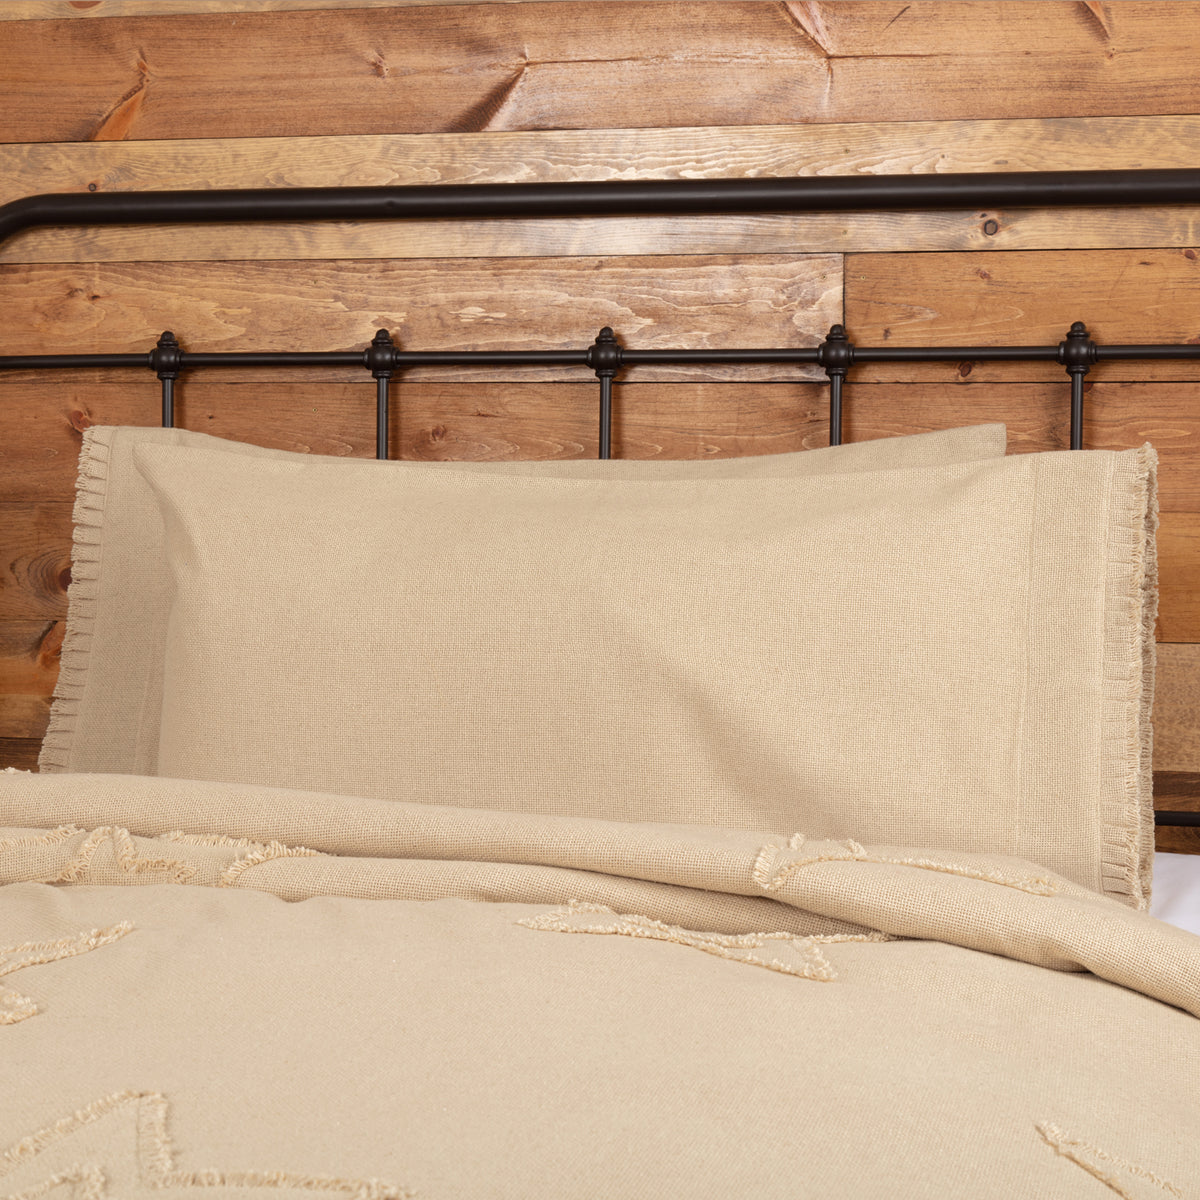 April & Olive Burlap Vintage King Pillow Case w/ Fringed Ruffle Set of 2 21x40 By VHC Brands